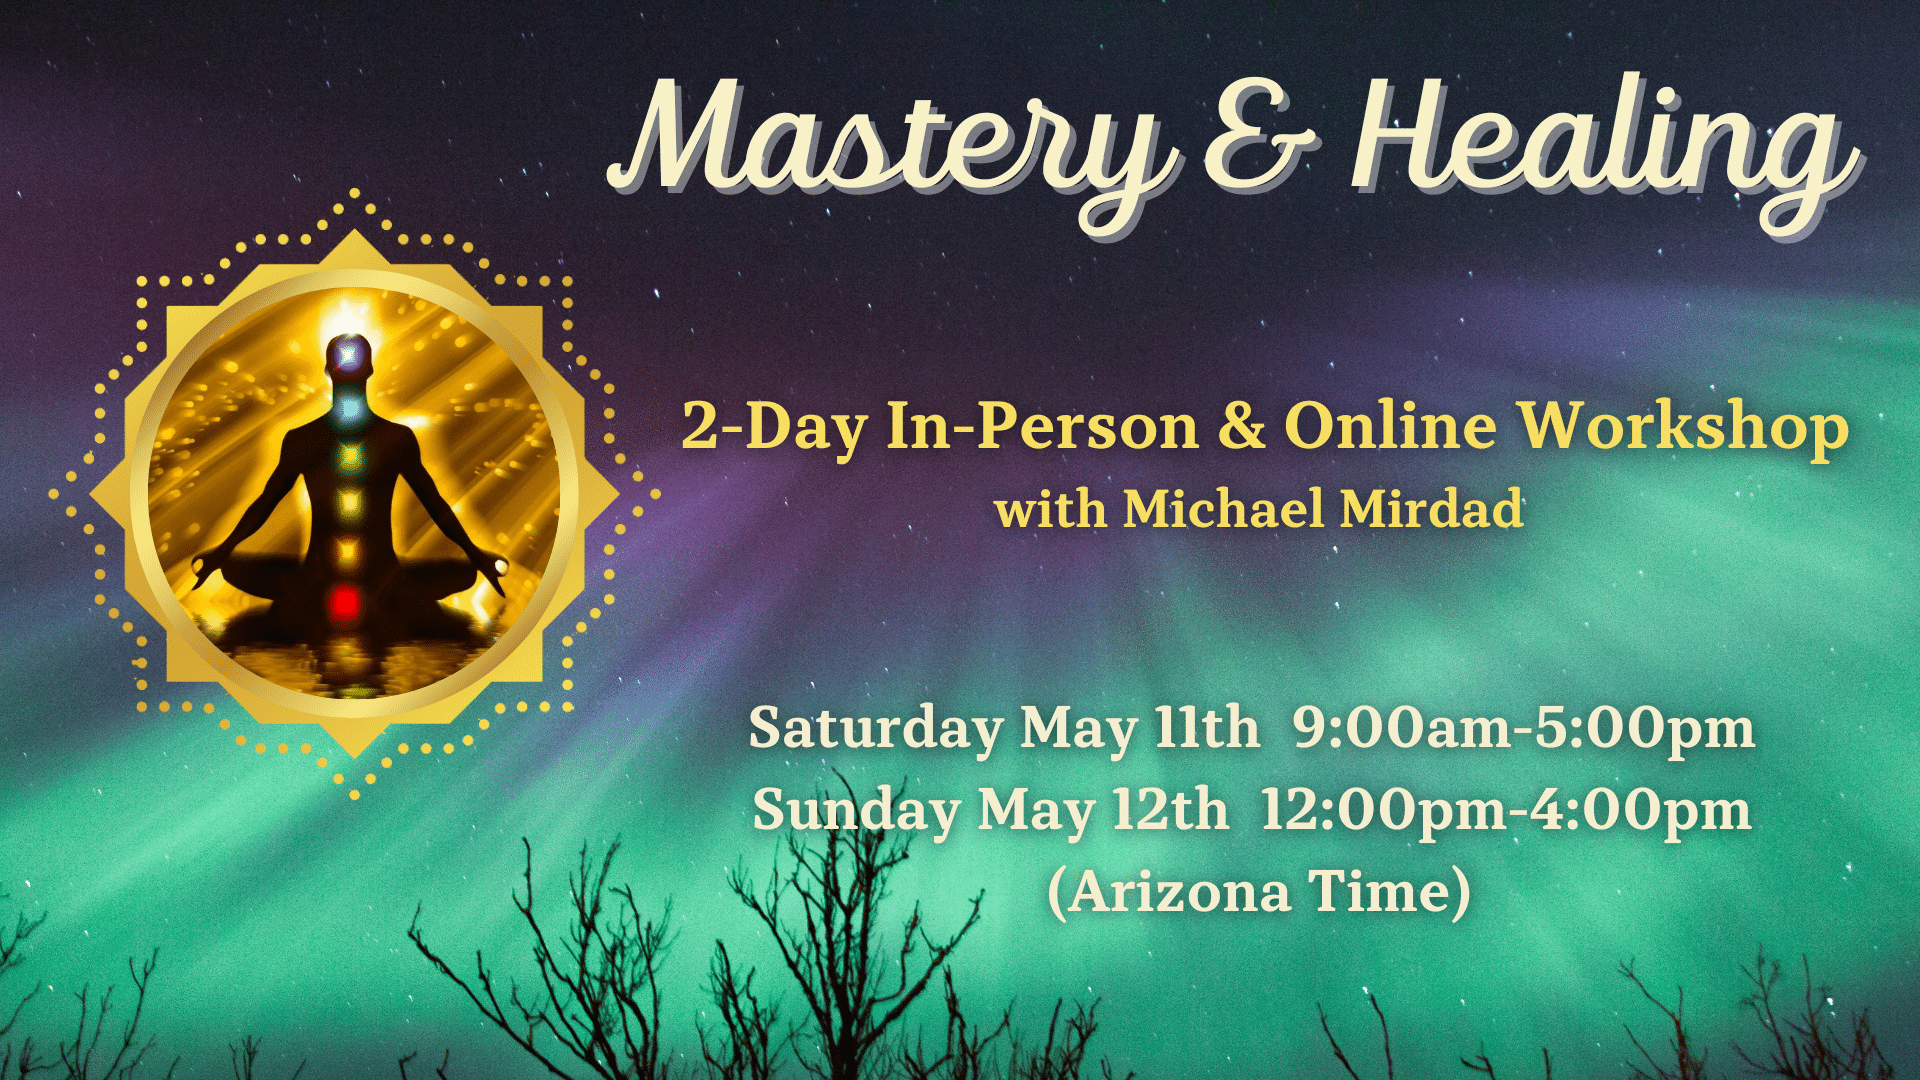 Promotional banner for "mastery & healing" workshop featuring a meditating figure in a lotus pose within a golden emblem, against a starry night sky backdrop, with 2024 event details